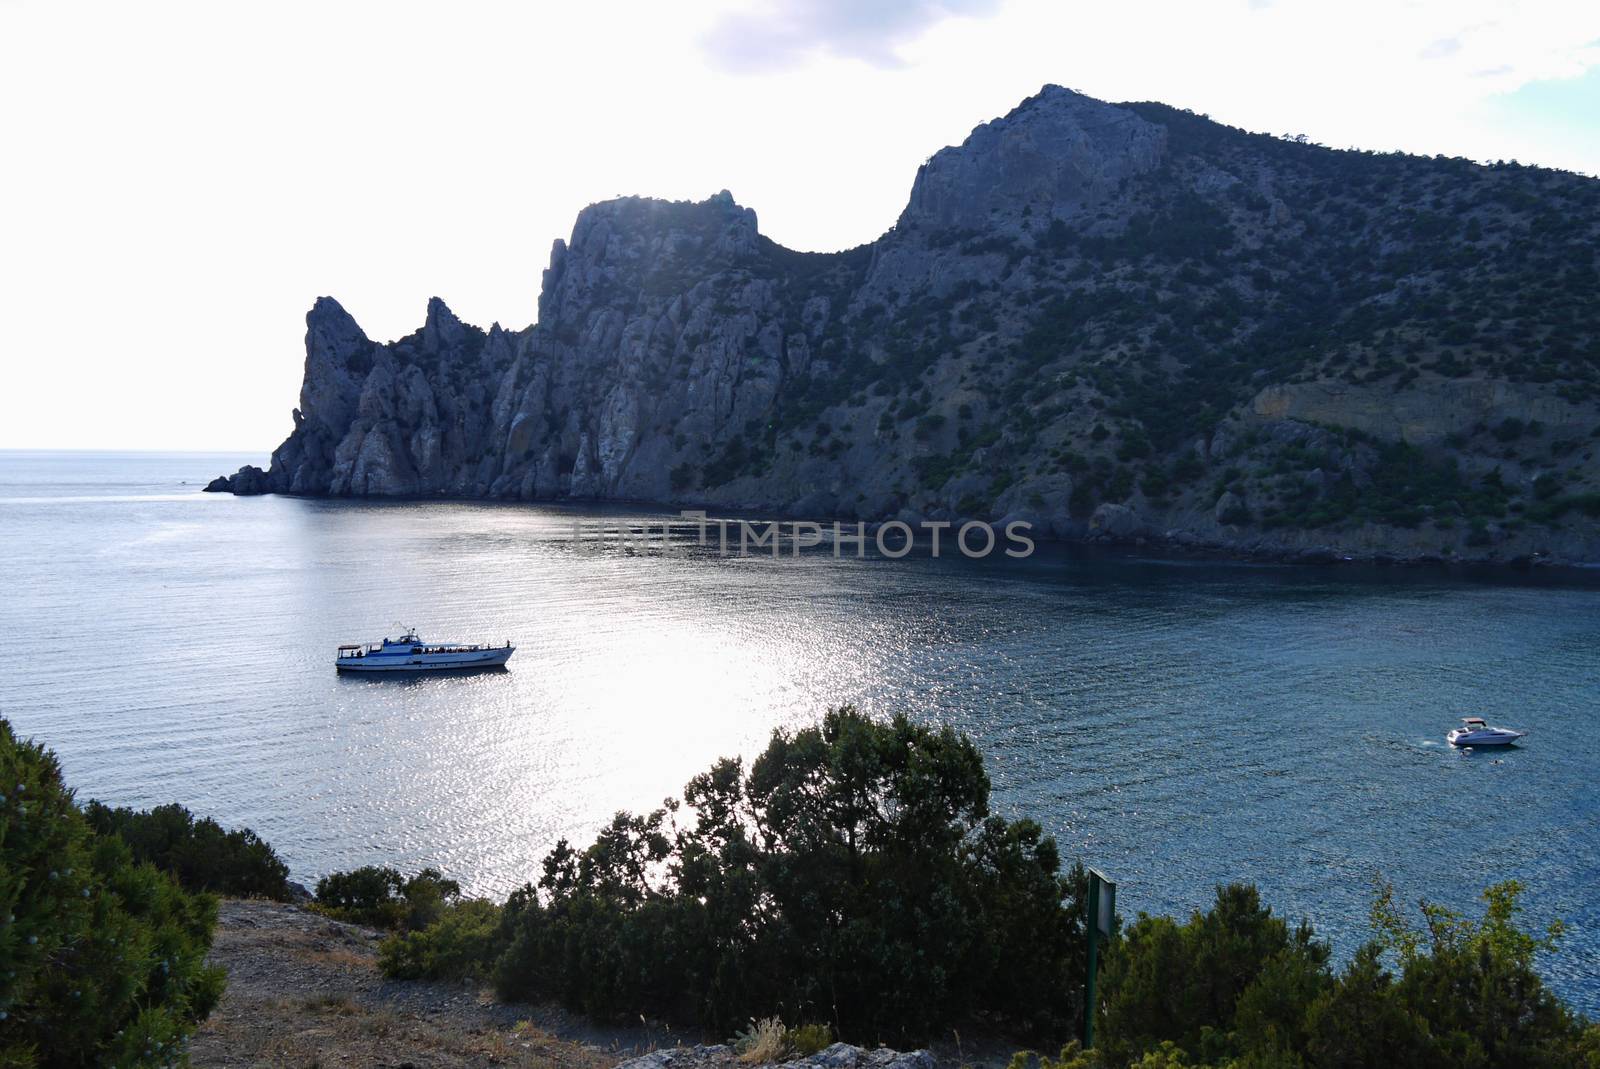 bay in the black sea on the background of steep cliffs covered with grass. Walking on a boat by Adamchuk